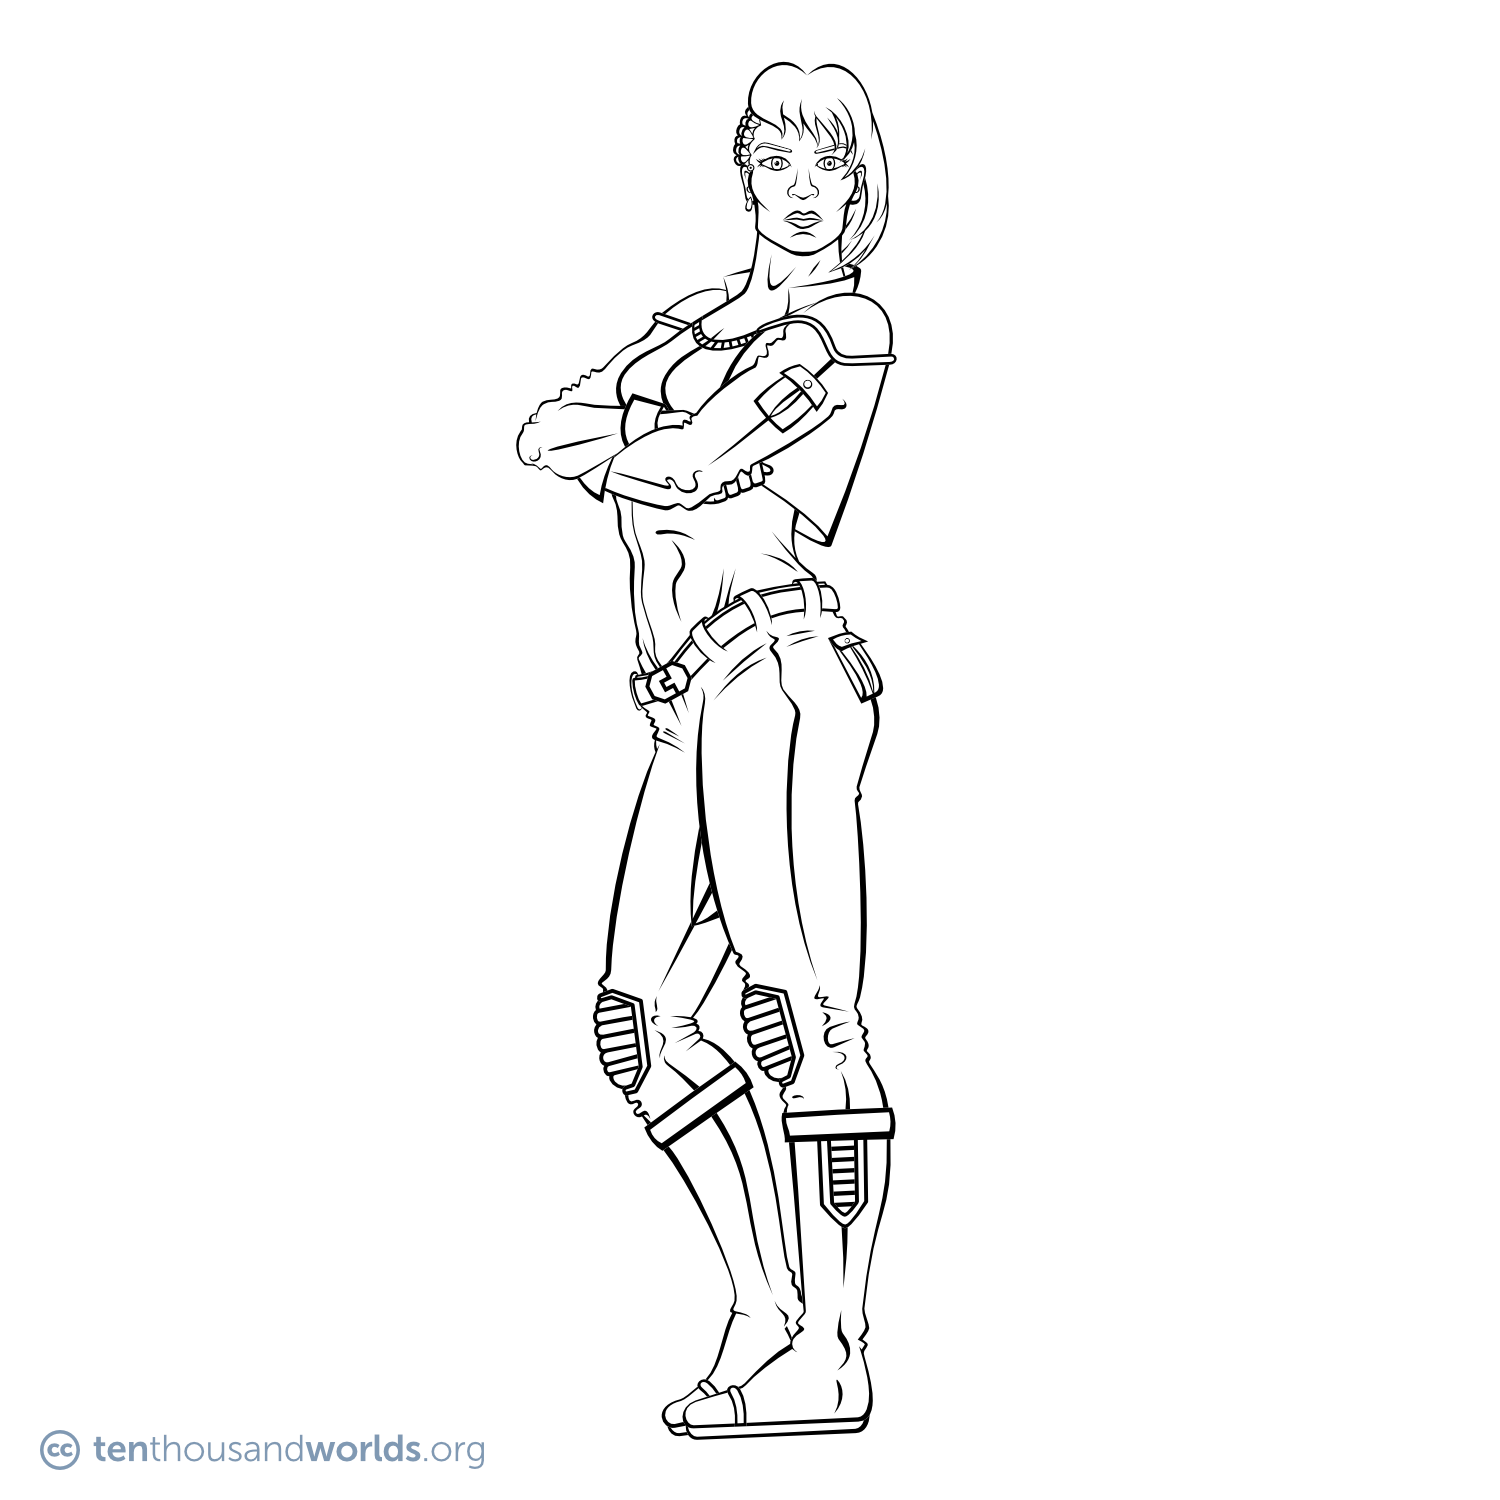 An ink outline of a woman in a futuristic pilot’s uniform standing with crossed arms.